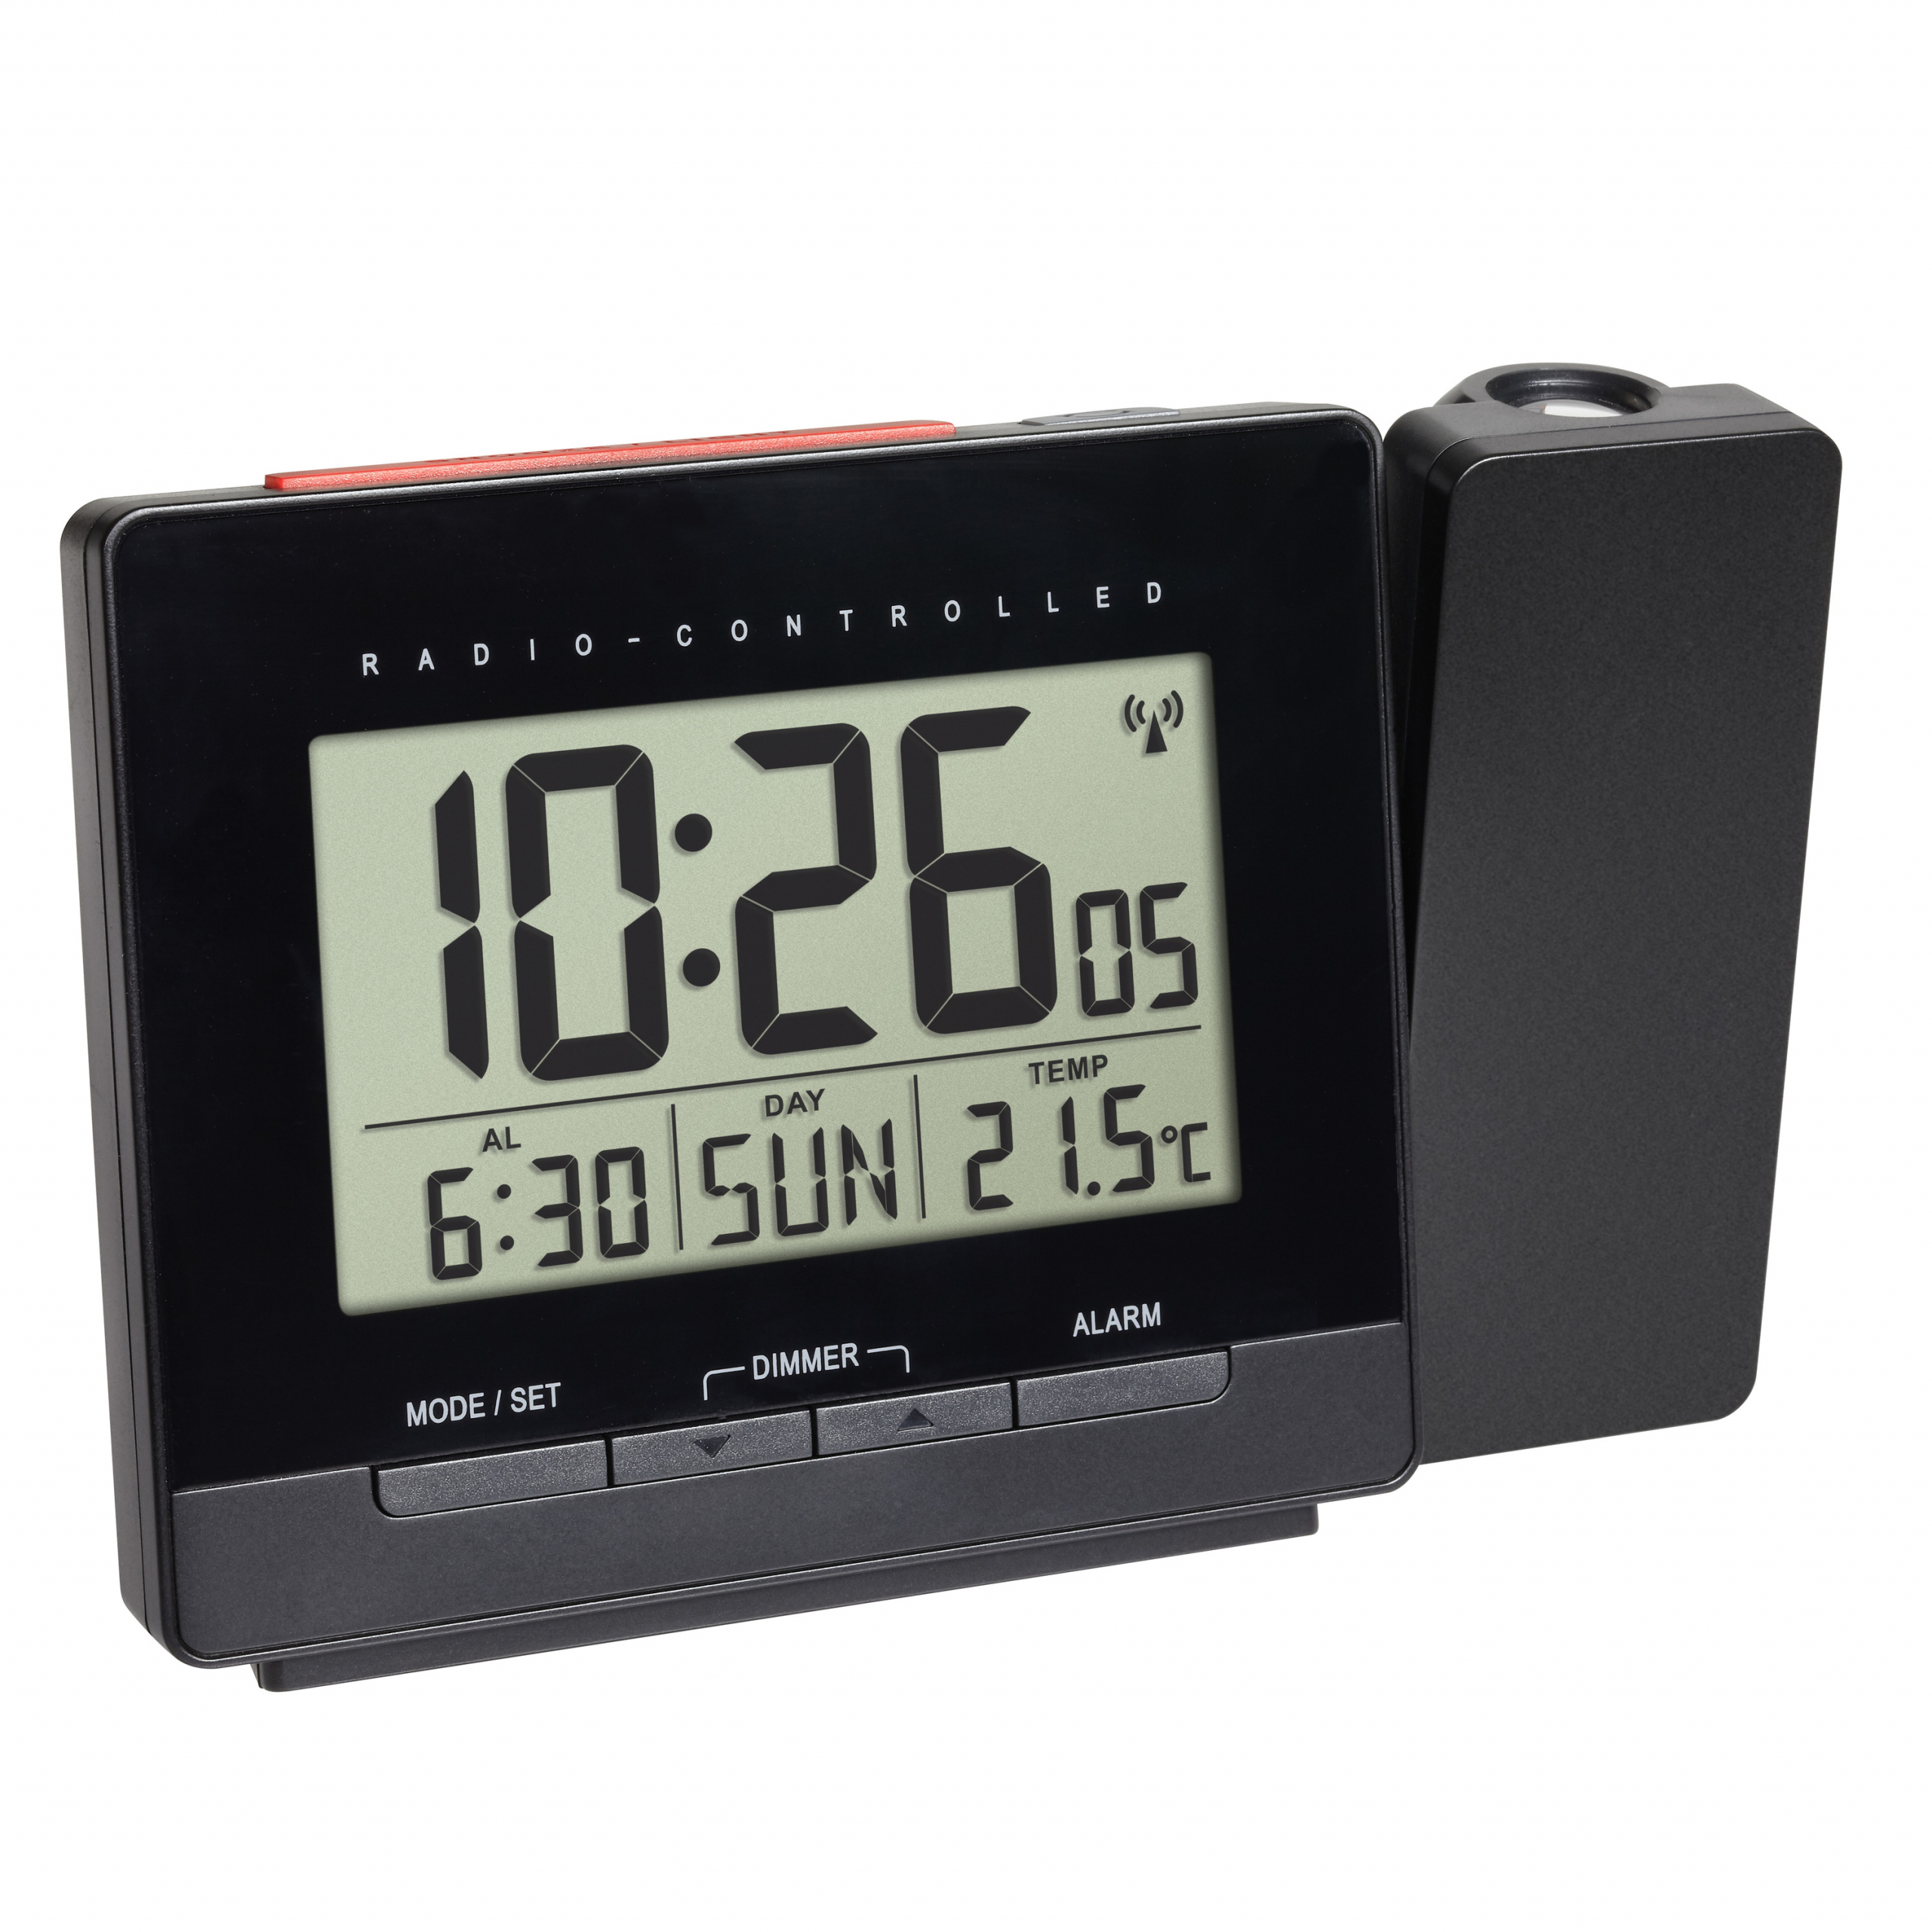 How To Set Radio Controlled Clock